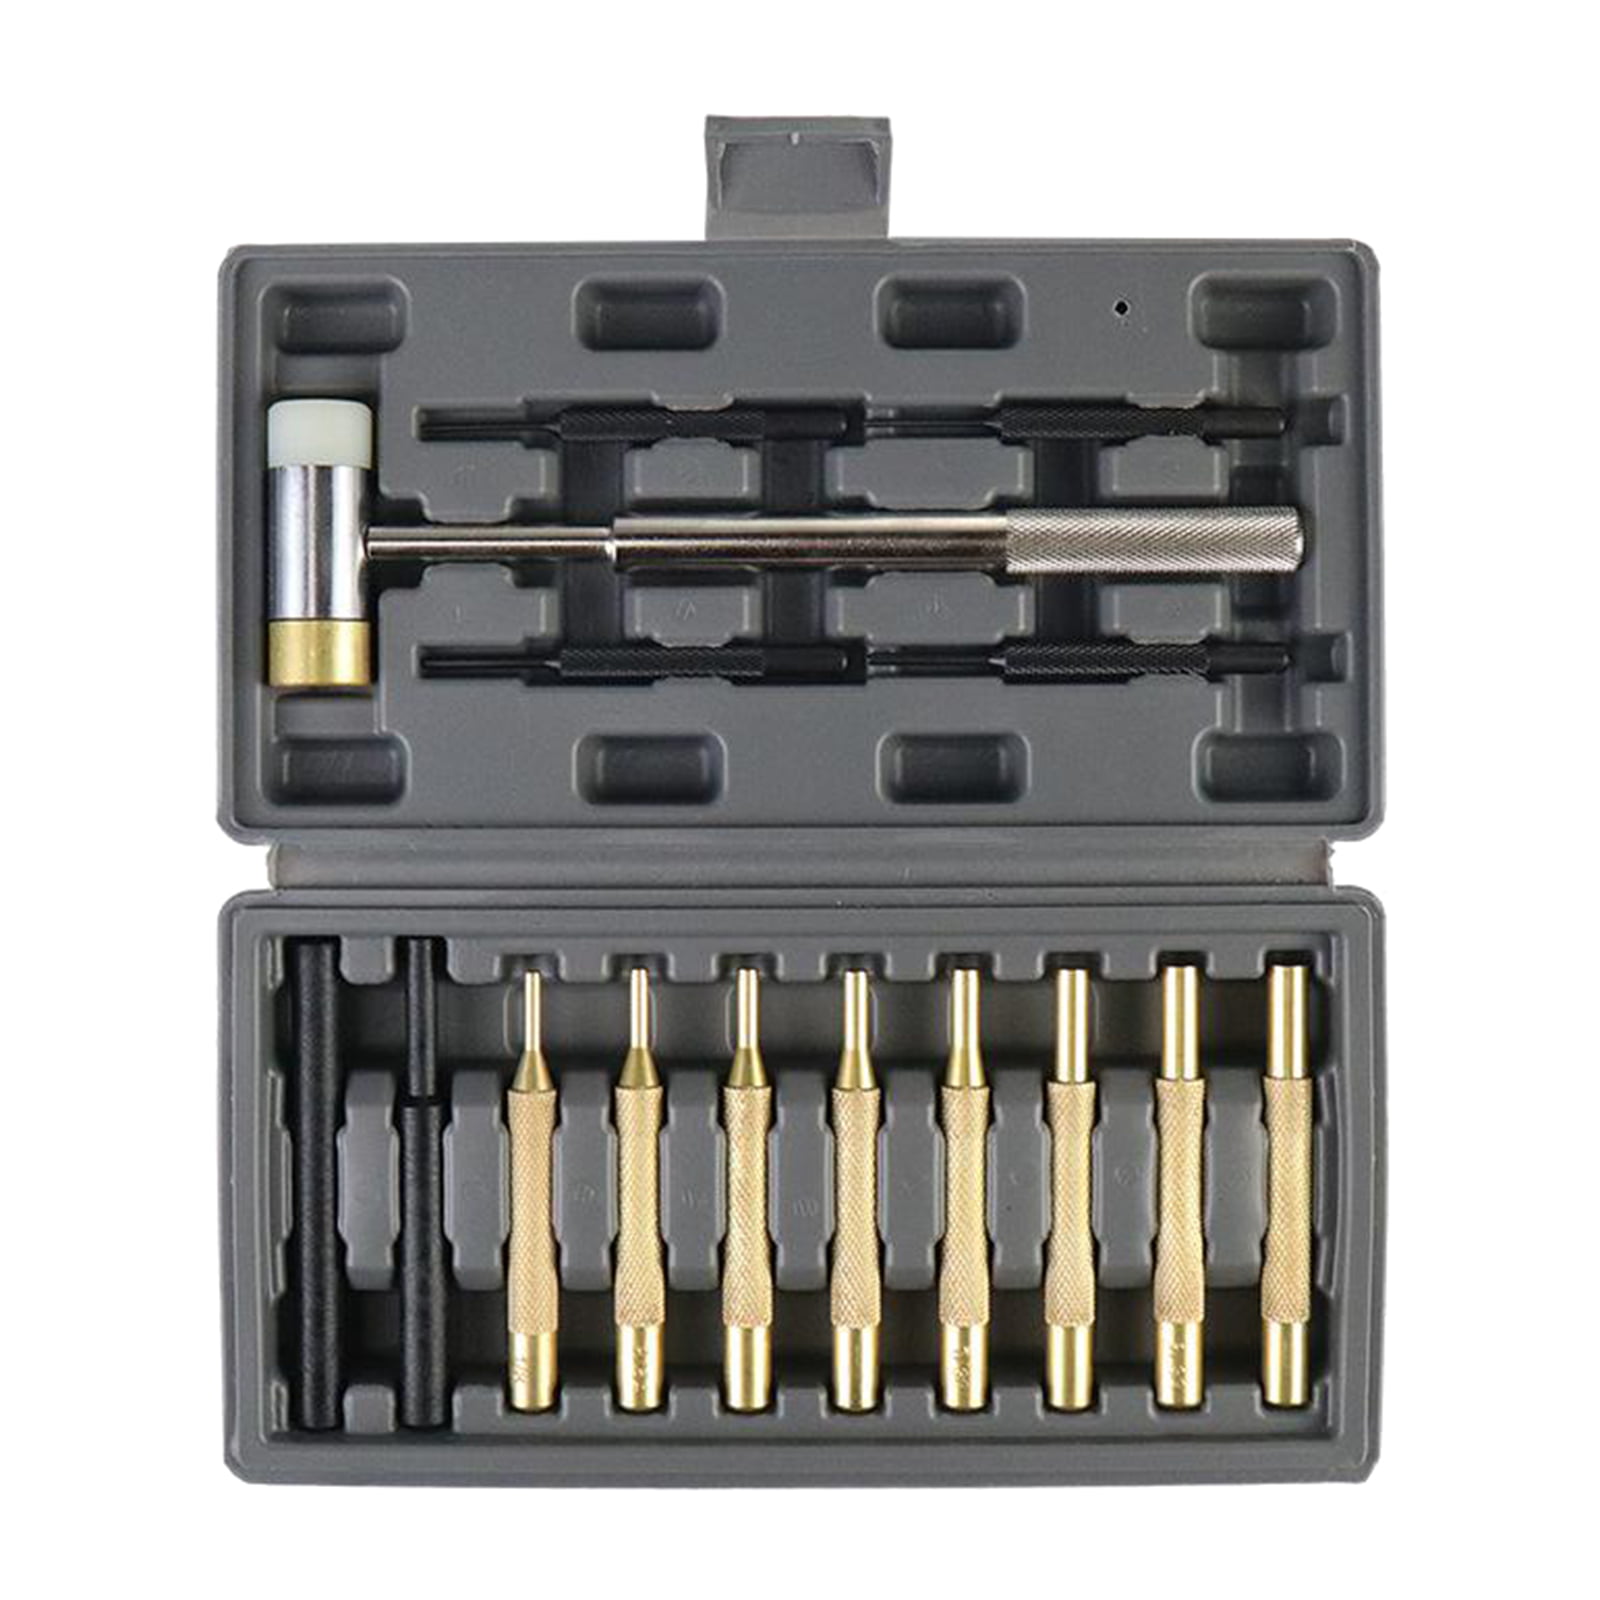 15Pcs/set Roll Pin Punch Set Tools Kits Great for Pistol Building  Removing Pin 